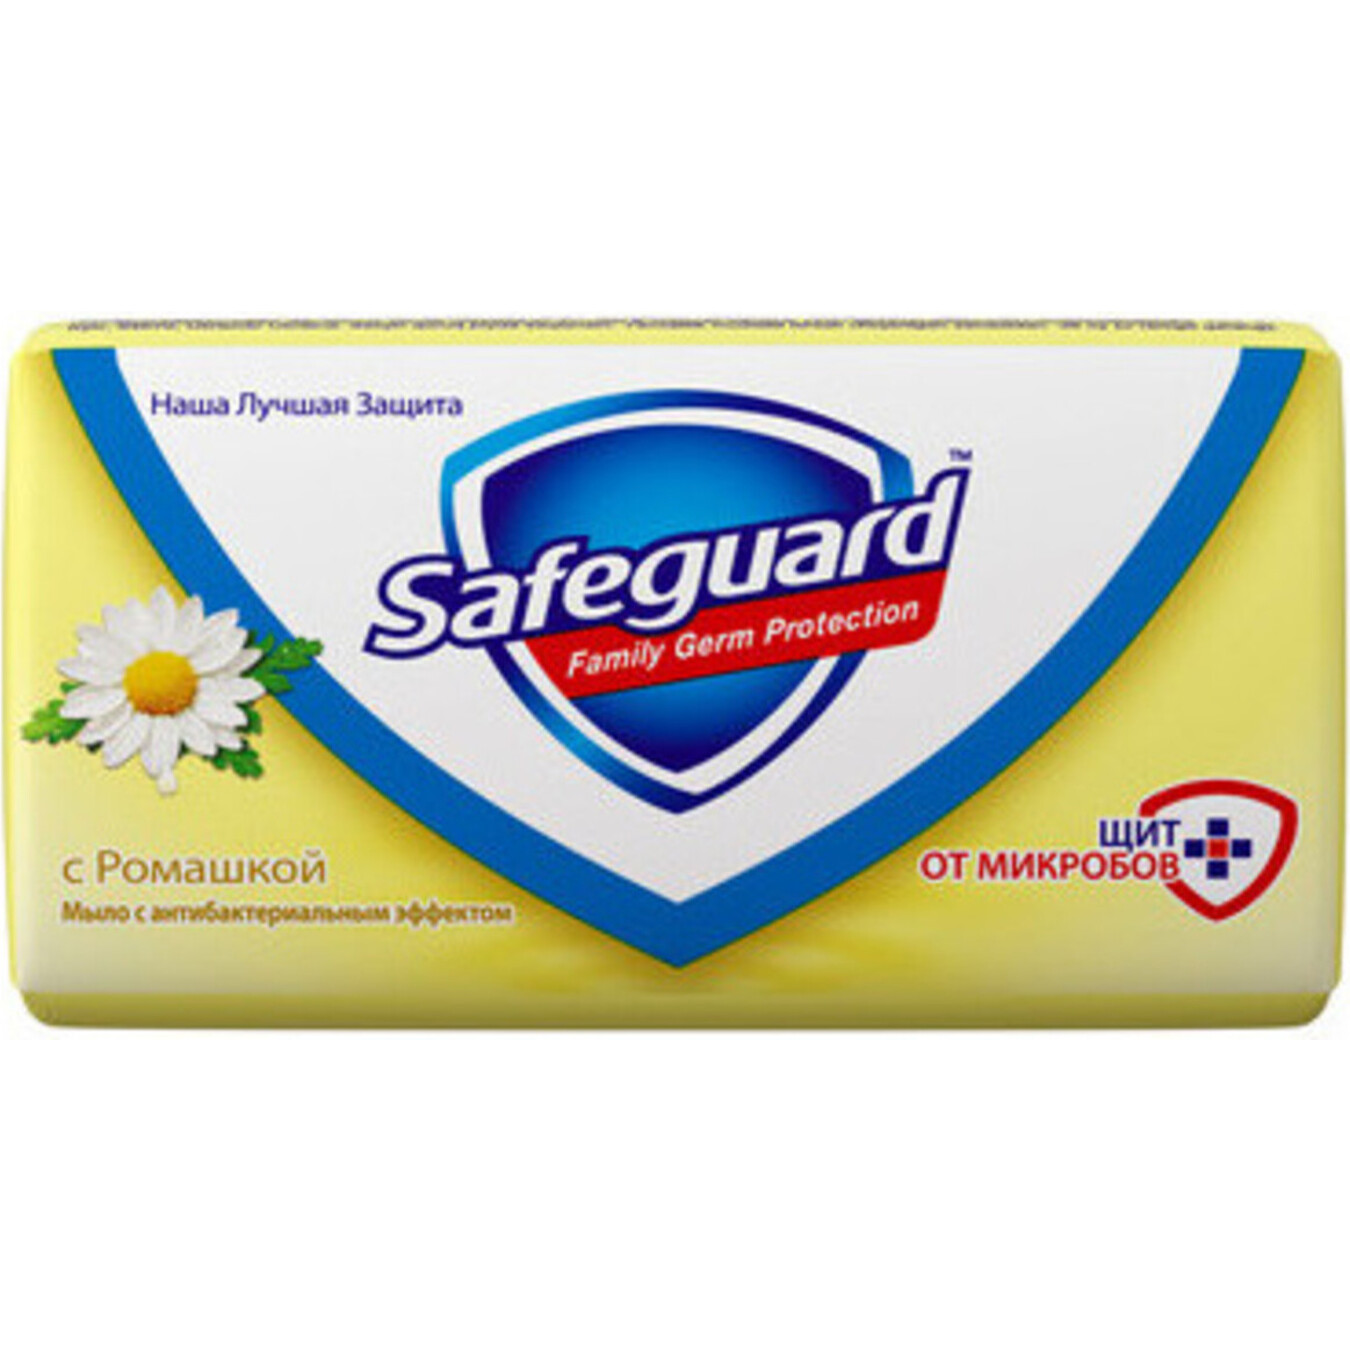 Safeguard with Camomile Toilet Soap 90g